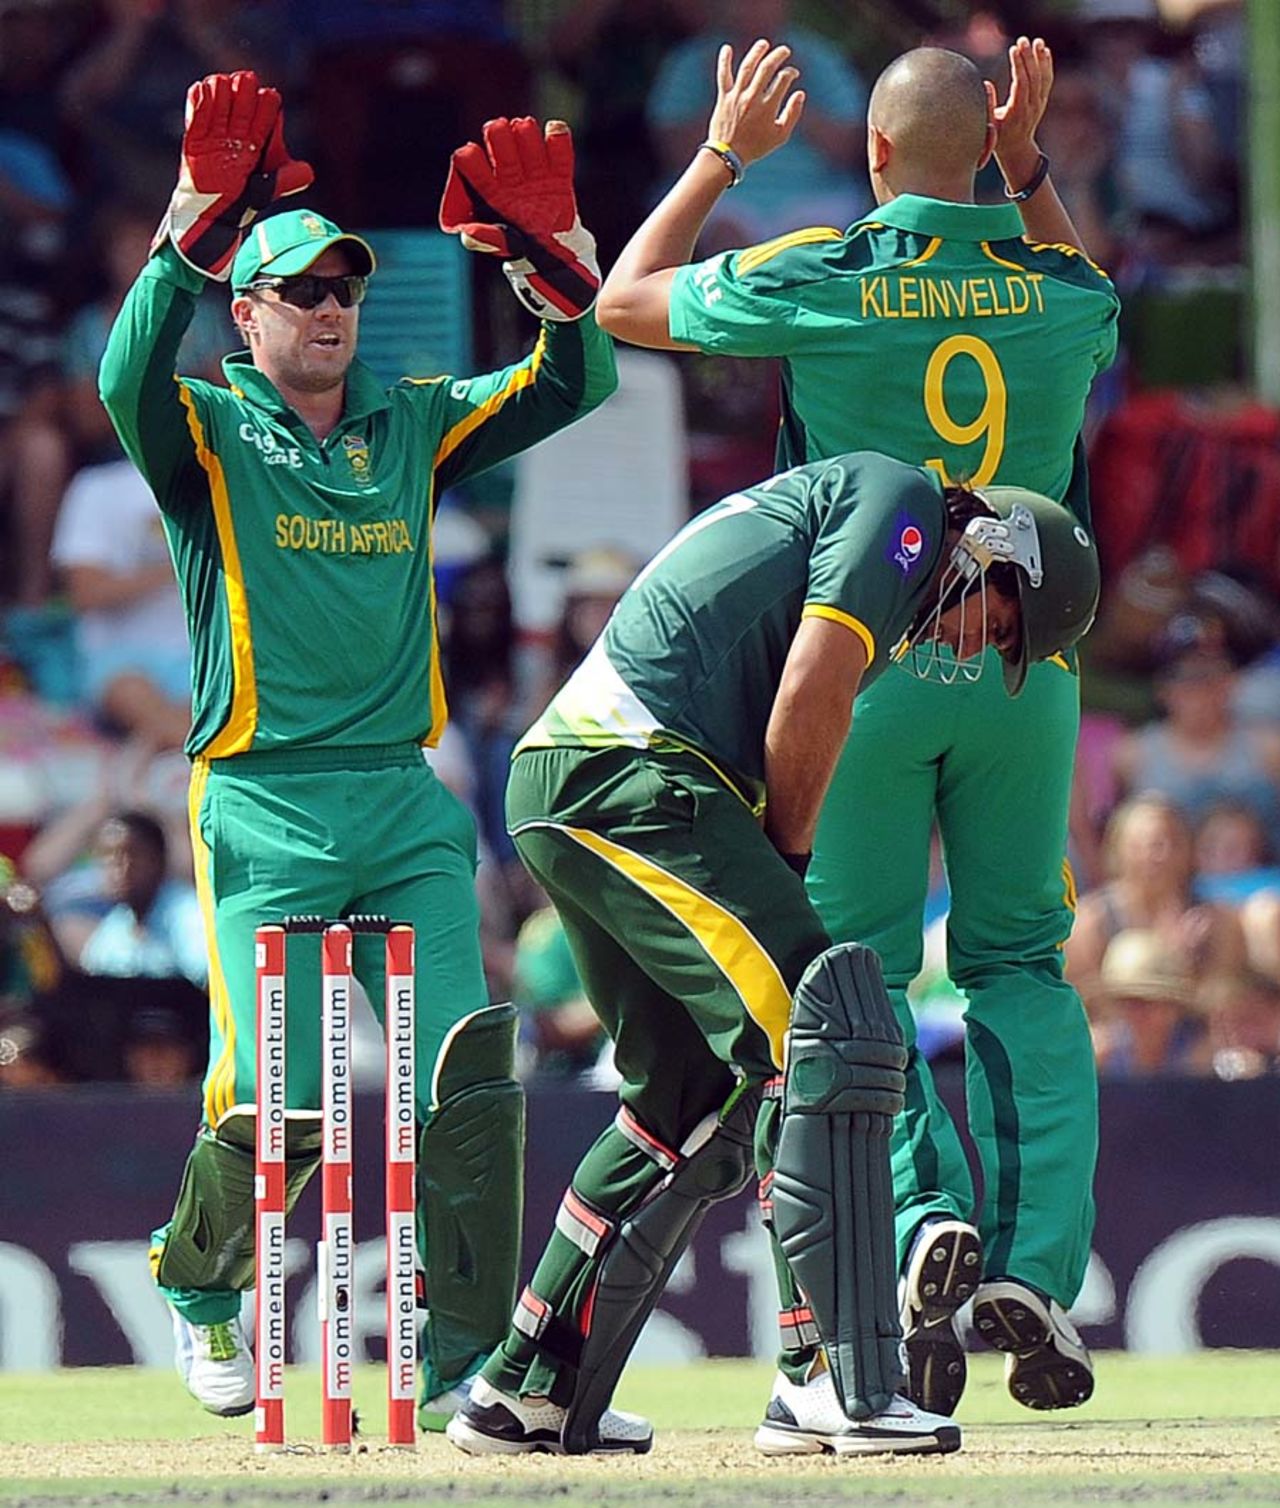 Nasir Jamshed reacts after being caught out, South Africa v Pakistan, 1st ODI, Bloemfontein, March 10, 2013